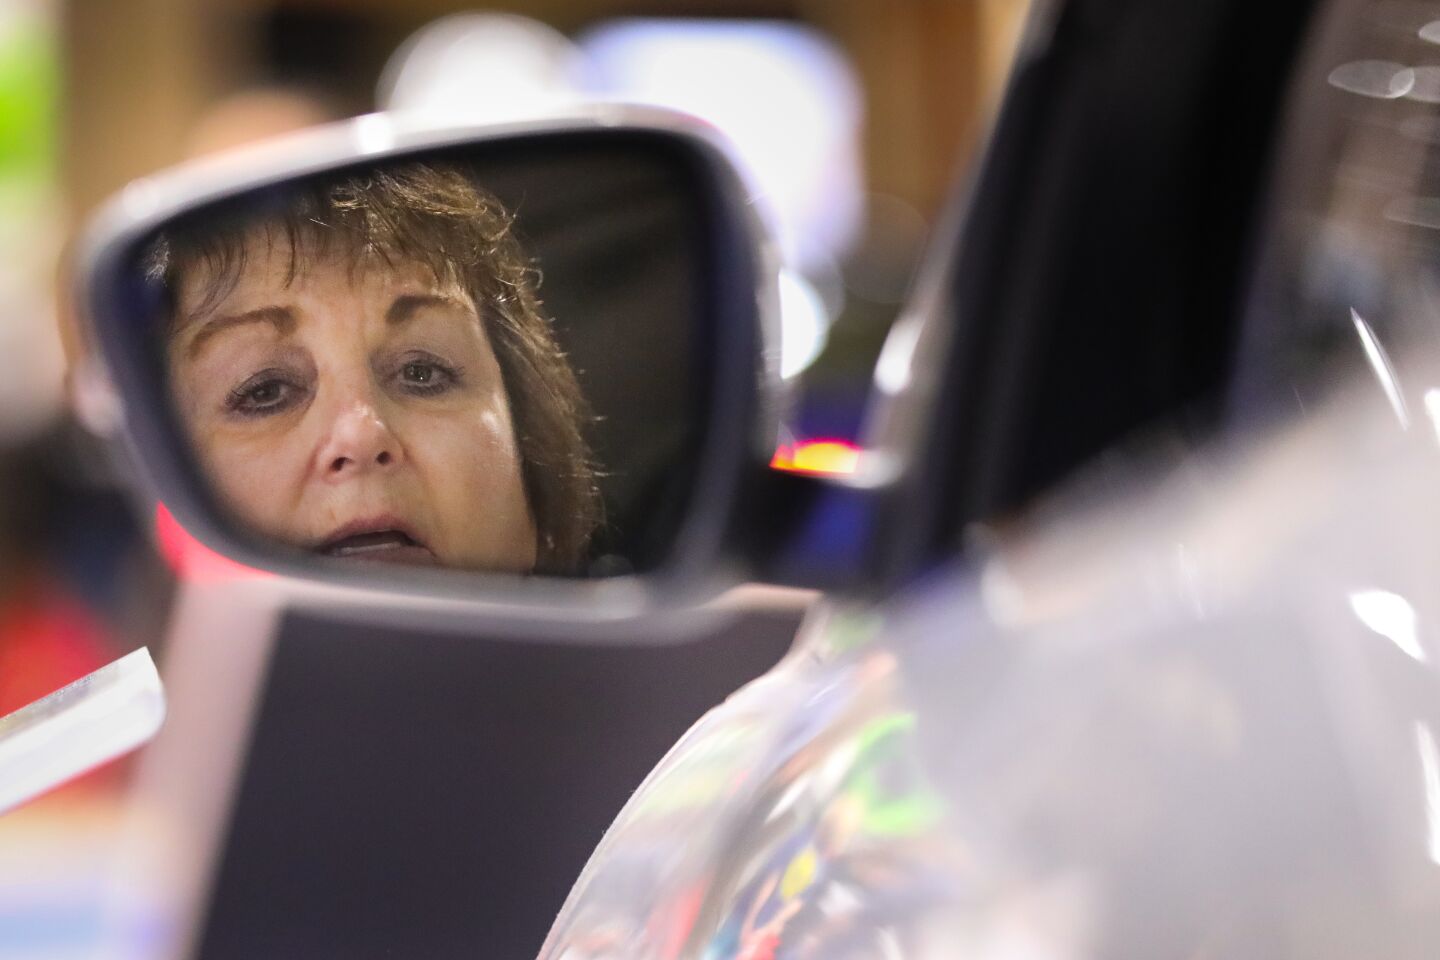 Edna Connolly of Carmel Mountain Ranch, looks in the side view mirror of a 2020 Ford Escape Titanium AWD SUV during the 2020 San Diego International Auto Show at the San Diego Convention Center, January 4, 2020.